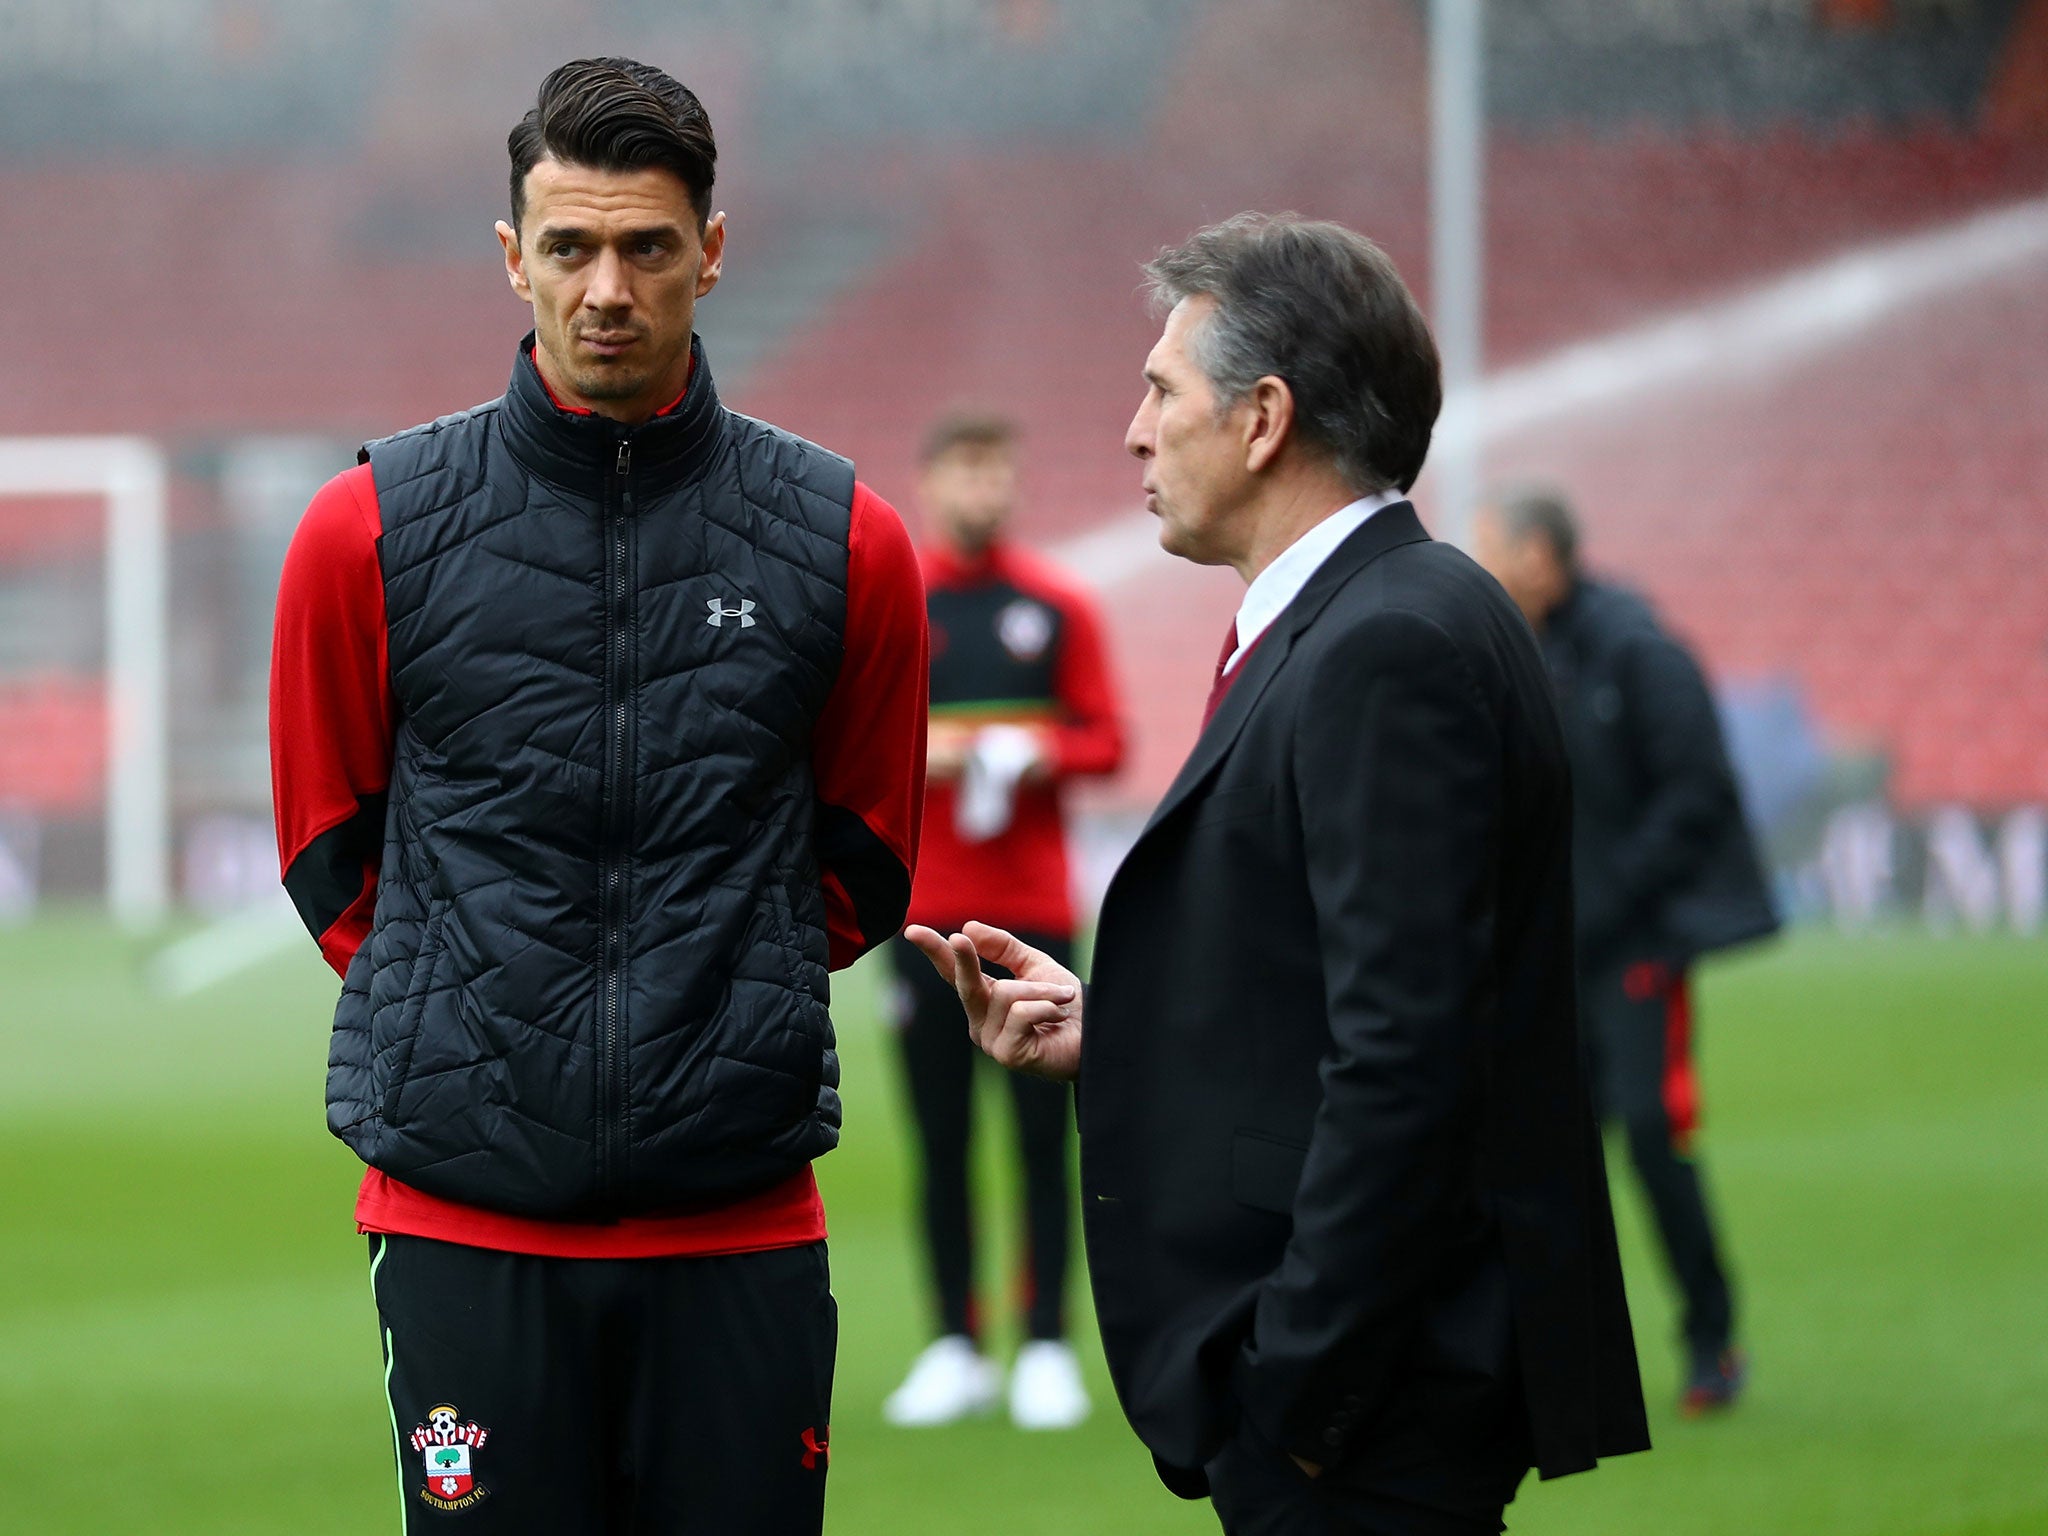 Claude Puel (right) will not select Jose Fonte (left) while his Southampton future is in doubt